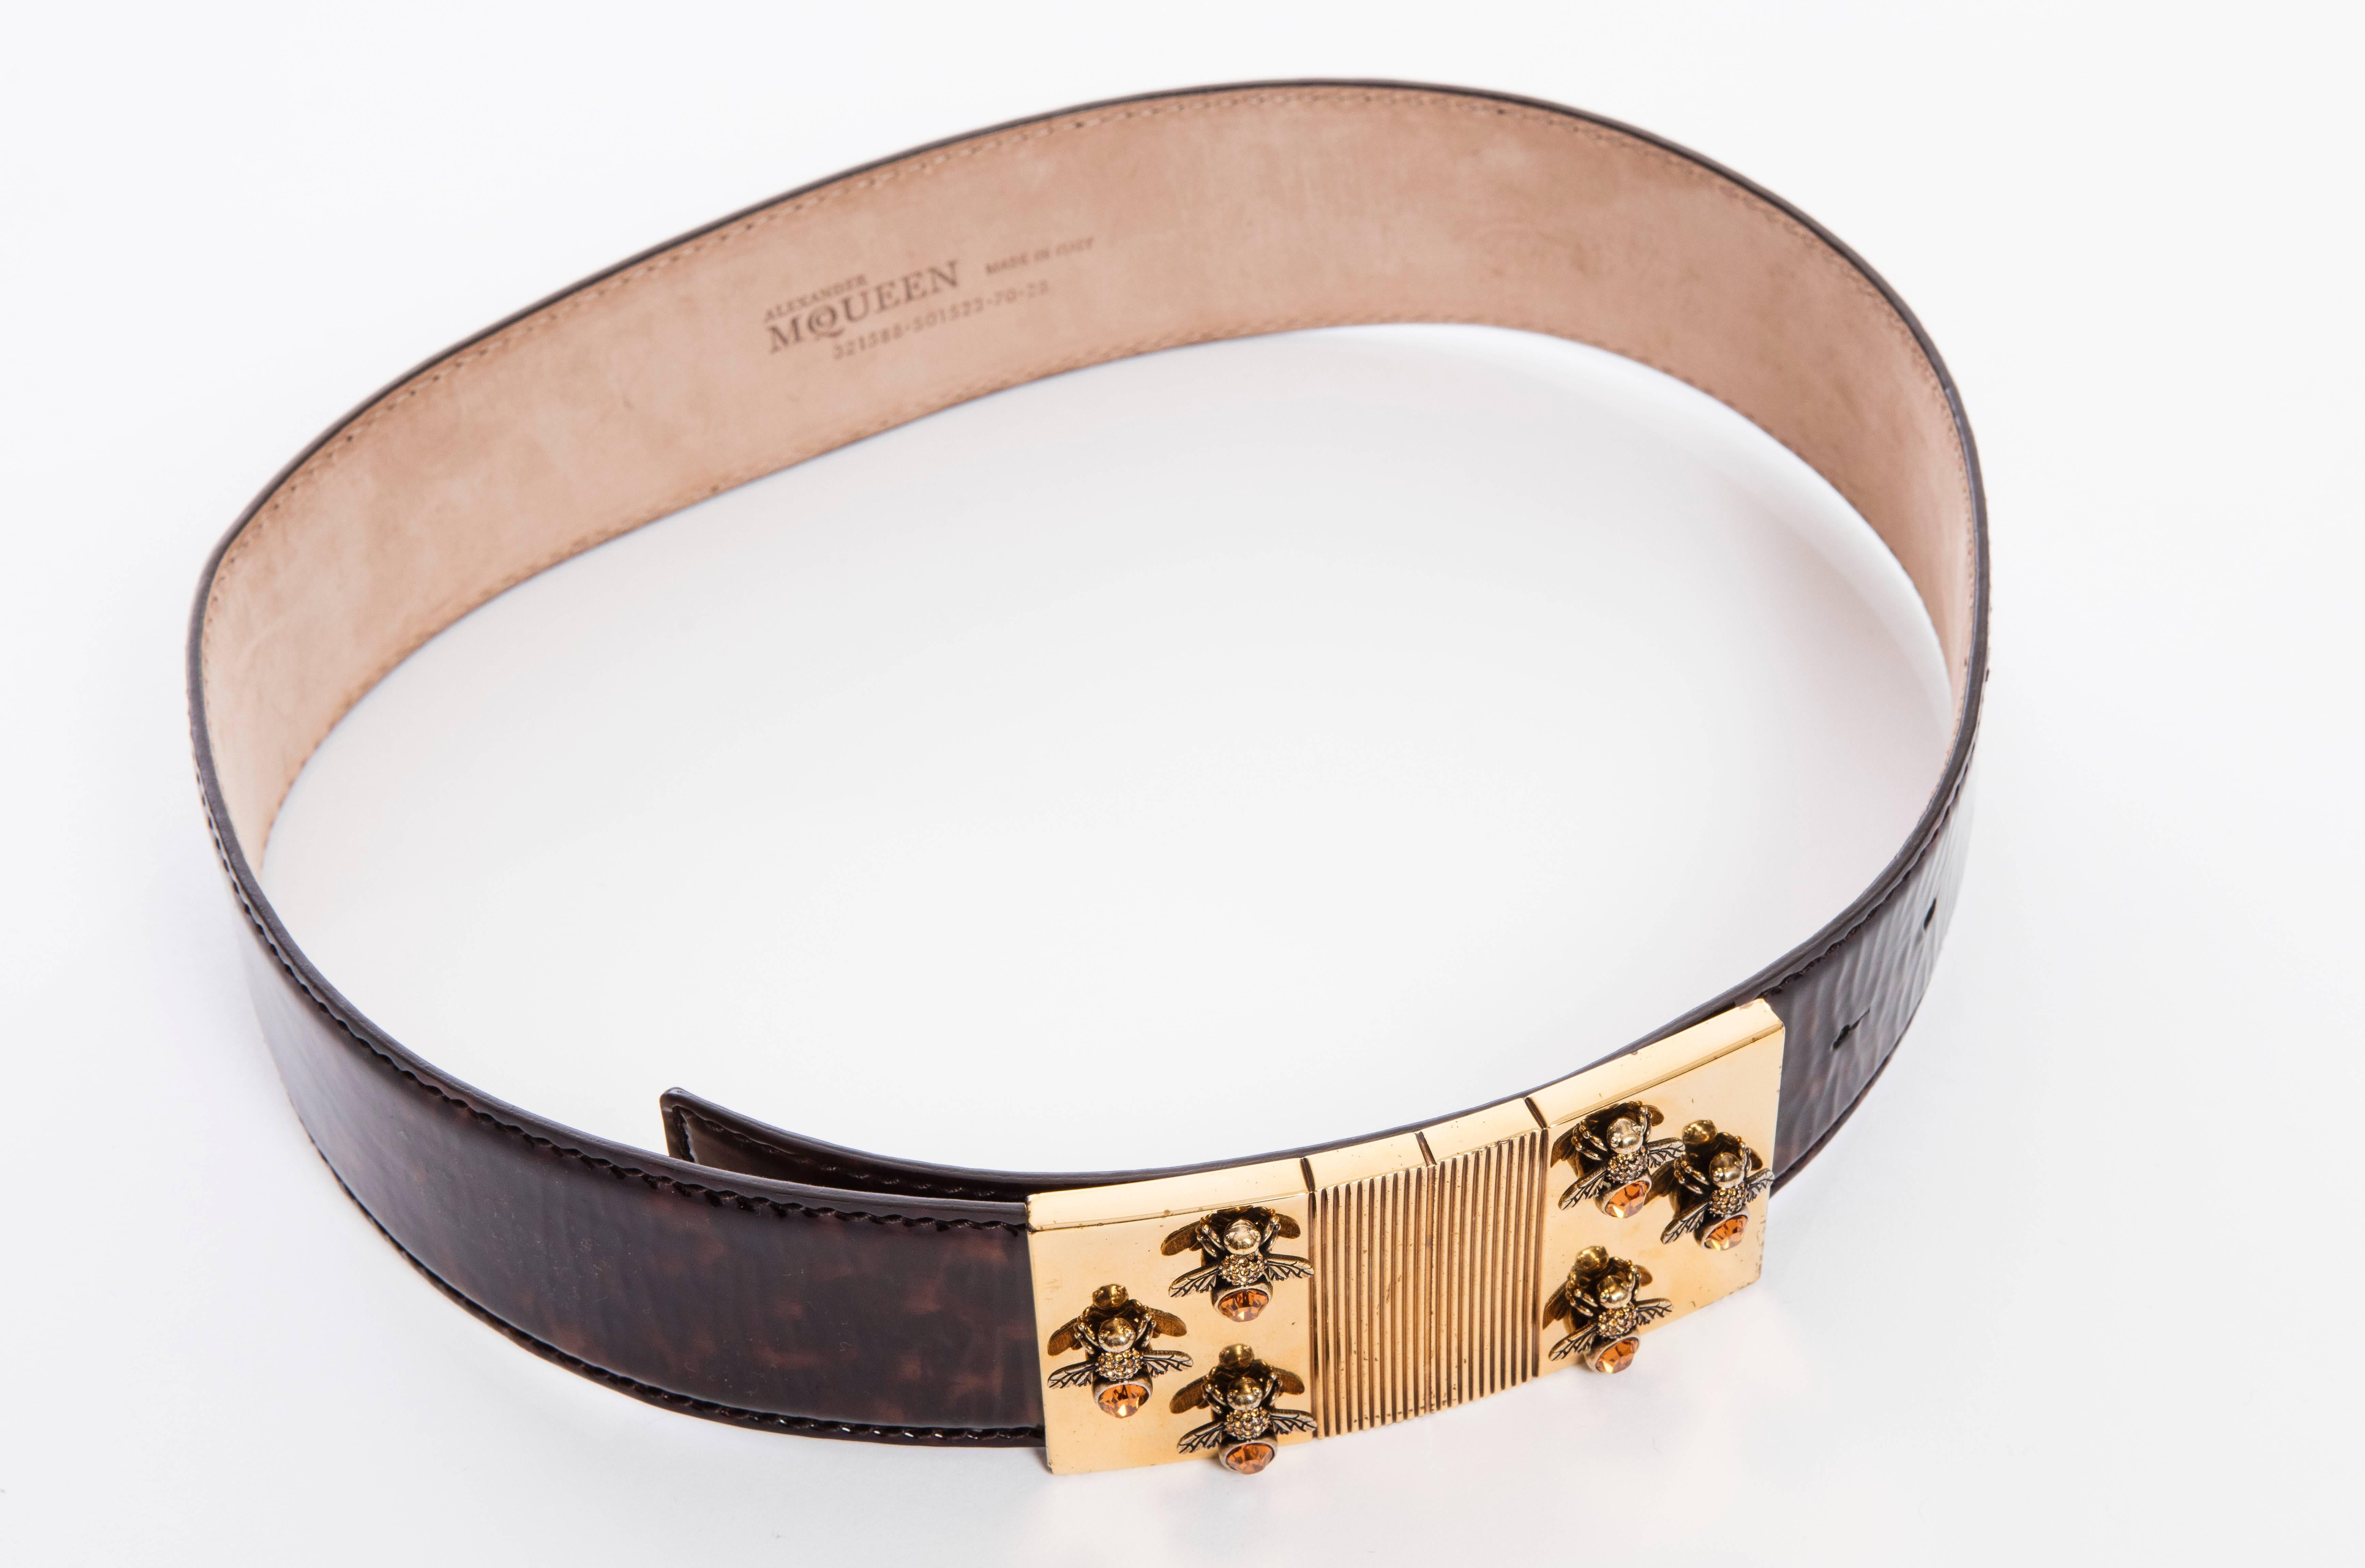 Alexander McQueen by Sarah Burton, Spring 2013 patent leather tortoise belt with tonal stitching and gold-tone bee buckle featuring peg-in-hole closure. Includes dust bag

Length 26“-30.5”, Width 2”